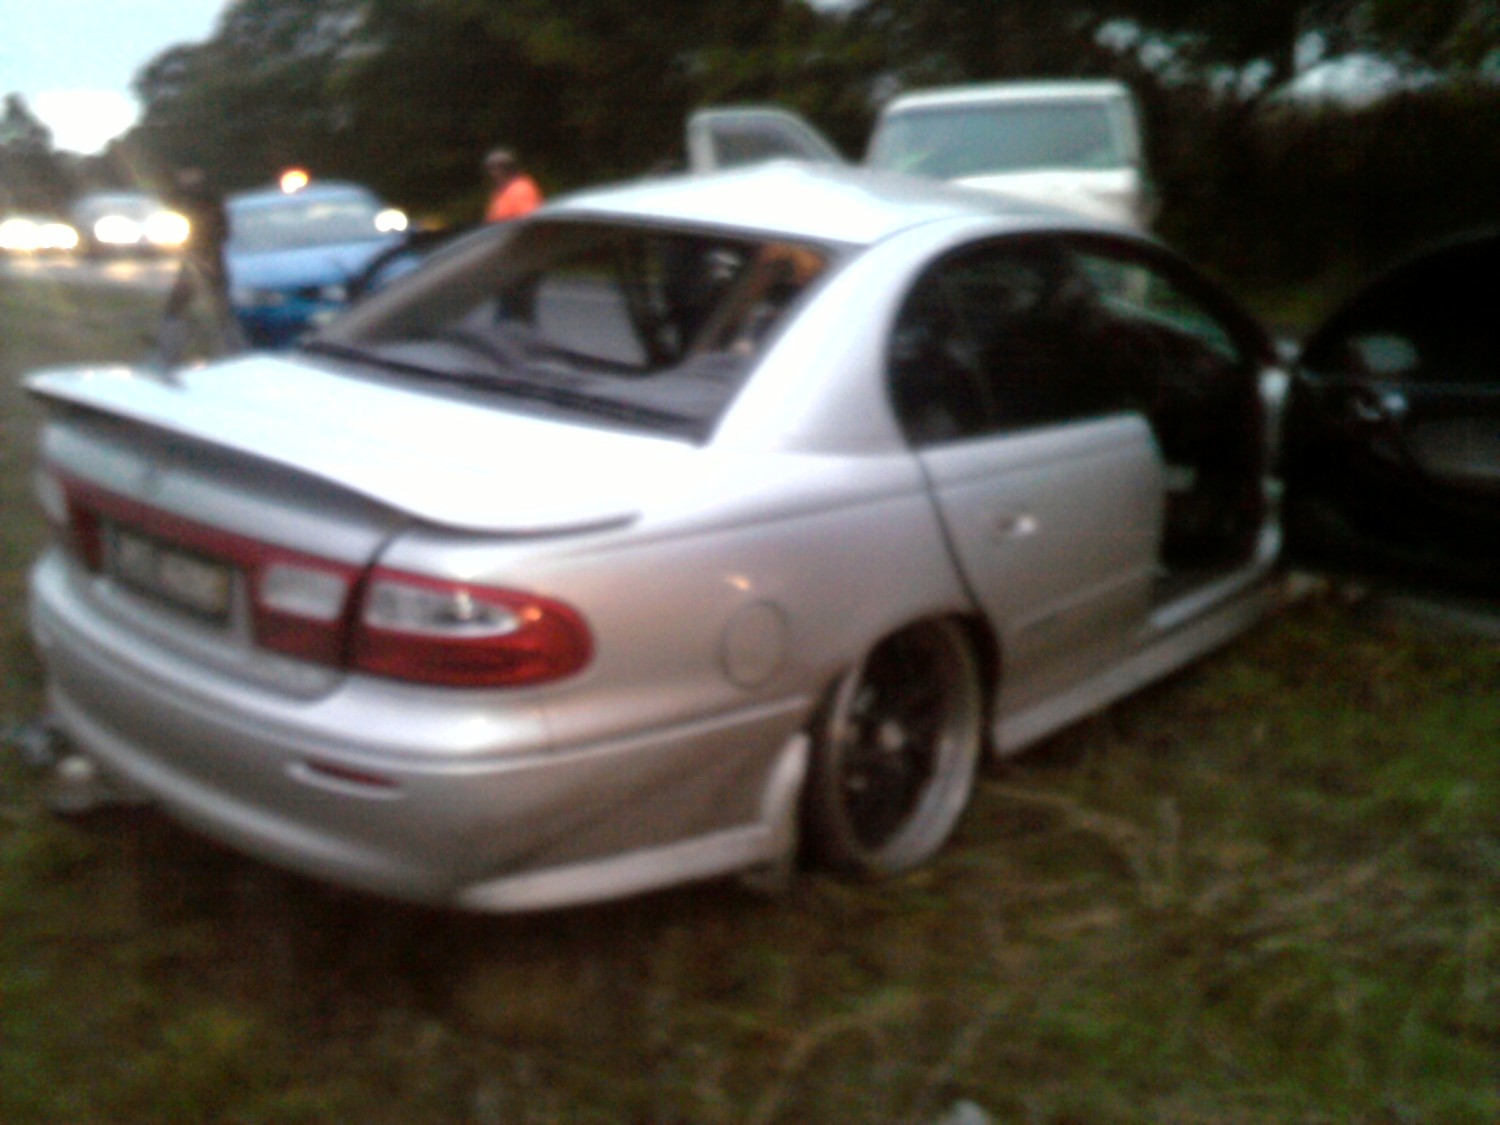 2002 Holden VX COMMODORE SS